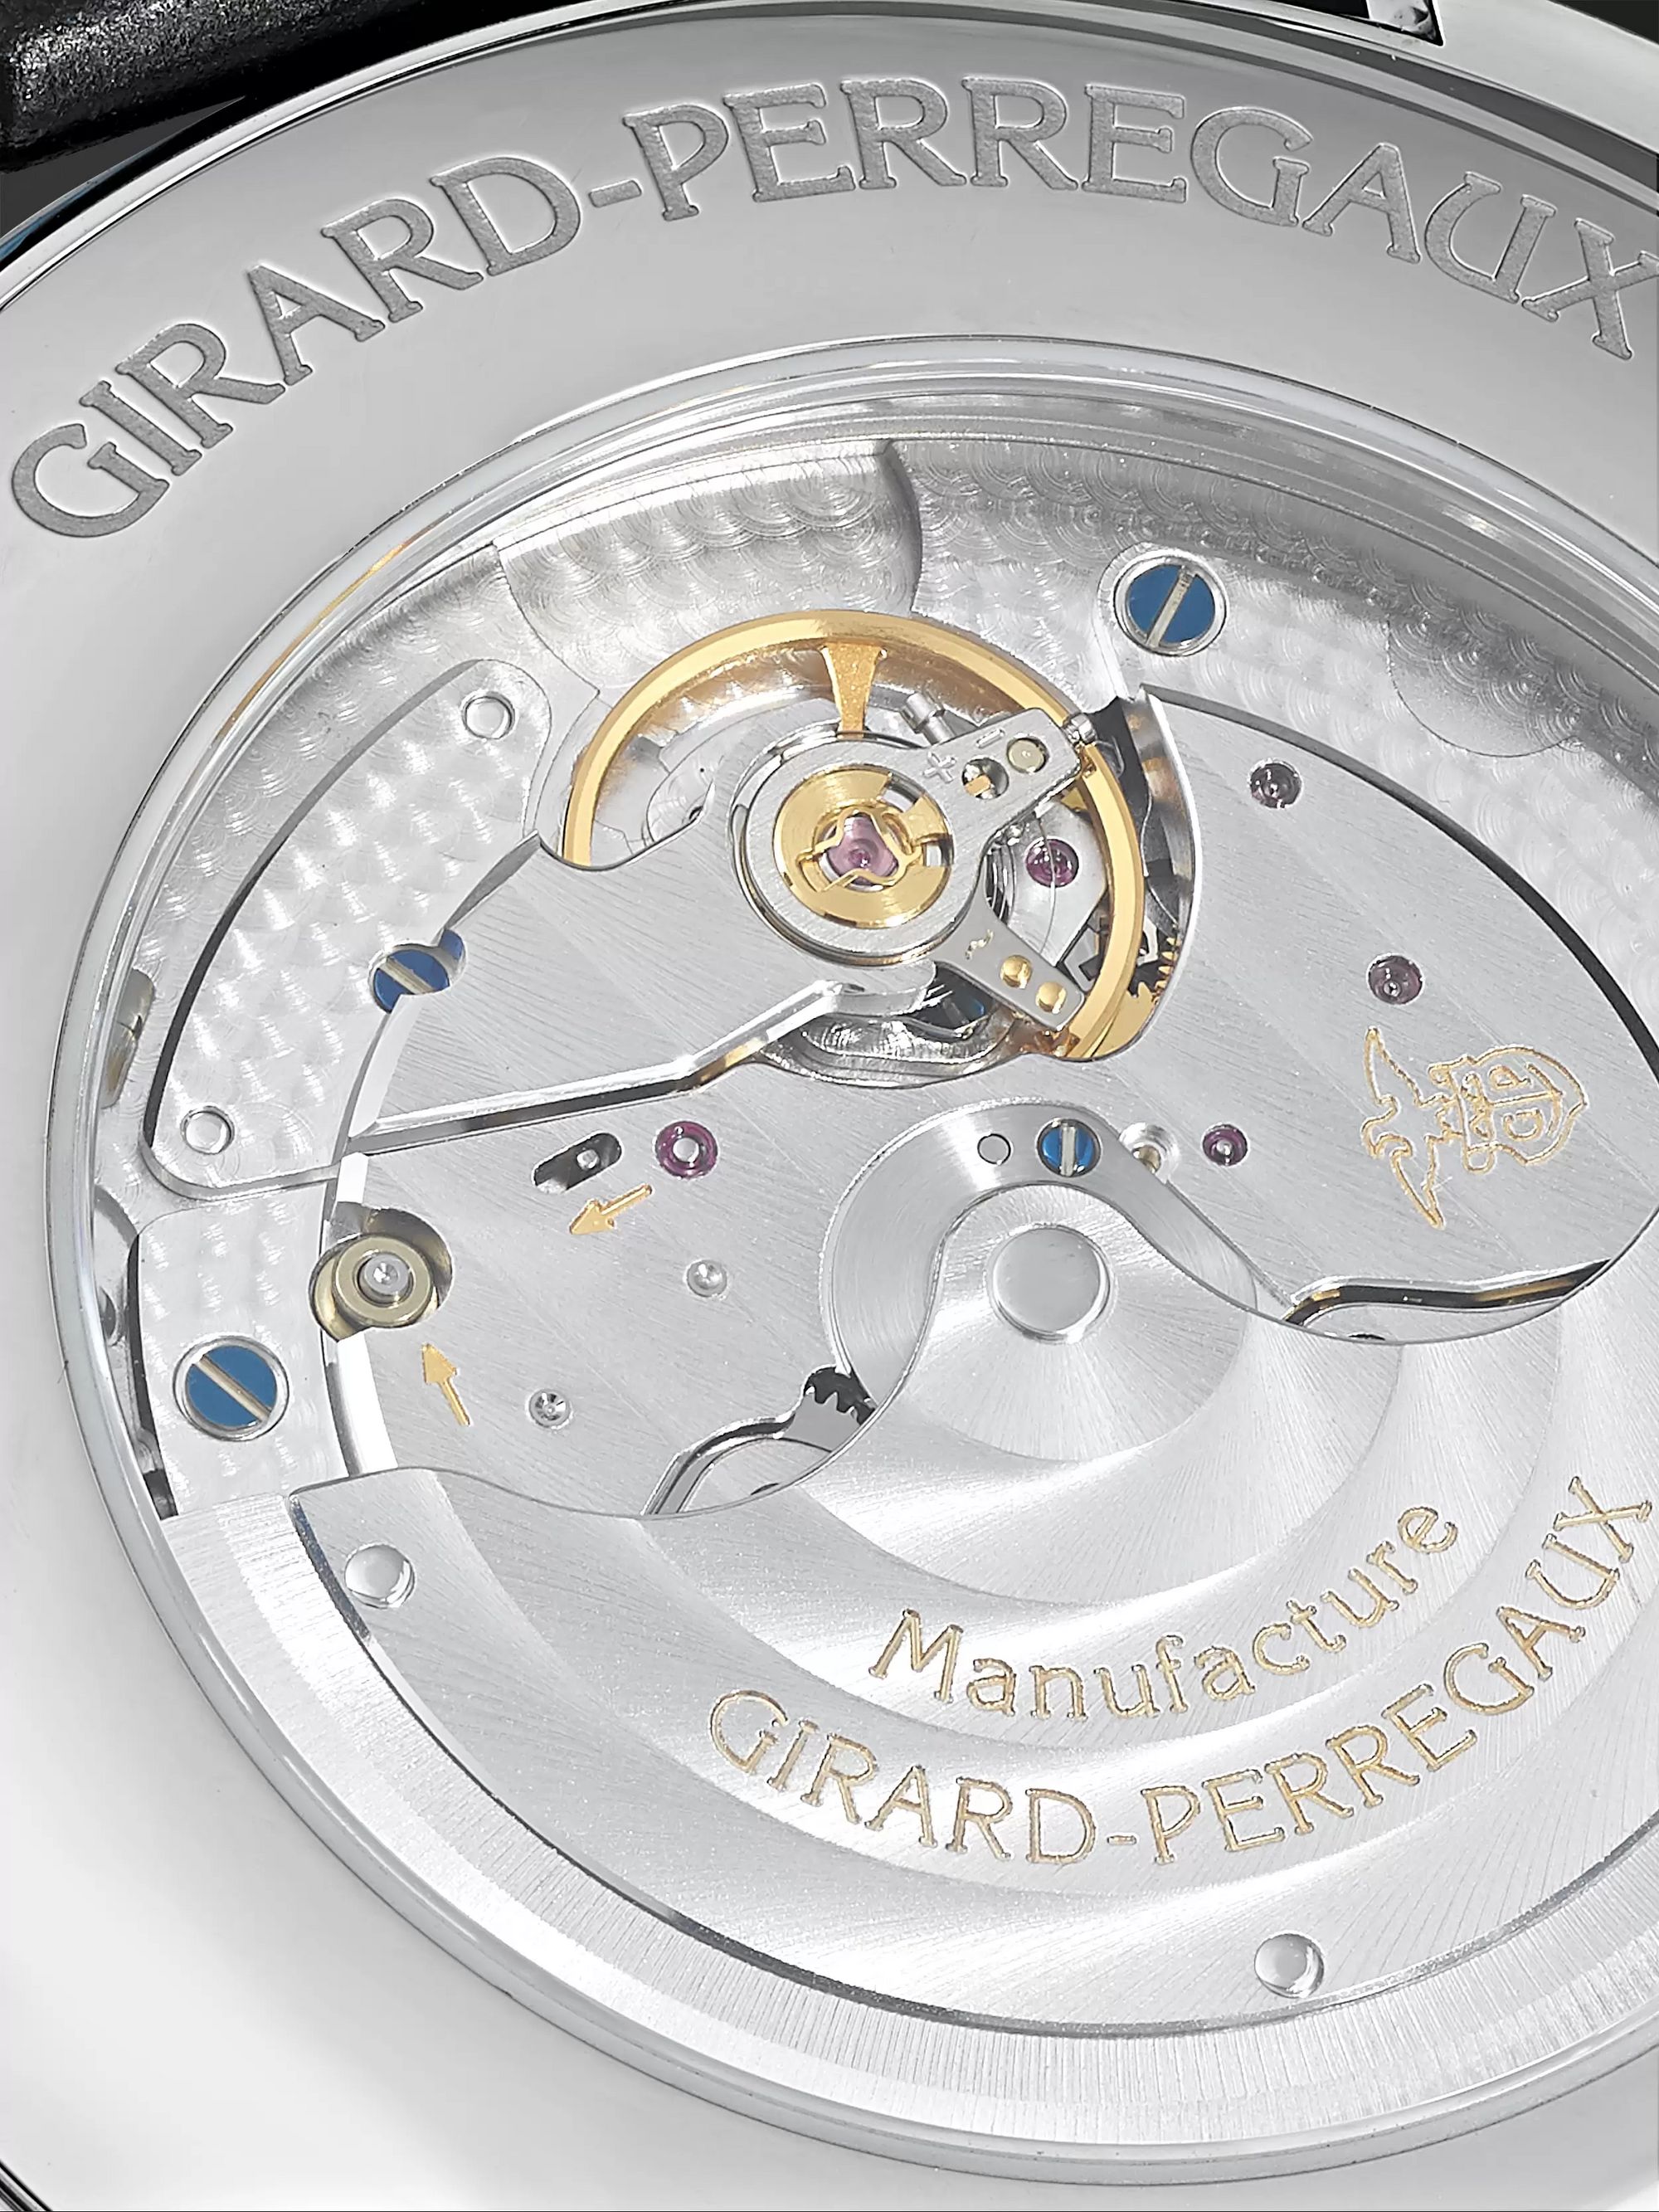 GIRARD-PERREGAUX 1966 Full Calendar Automatic 40mm Stainless Steel and Alligator Watch, Ref. No. 49535-11-131-BB60